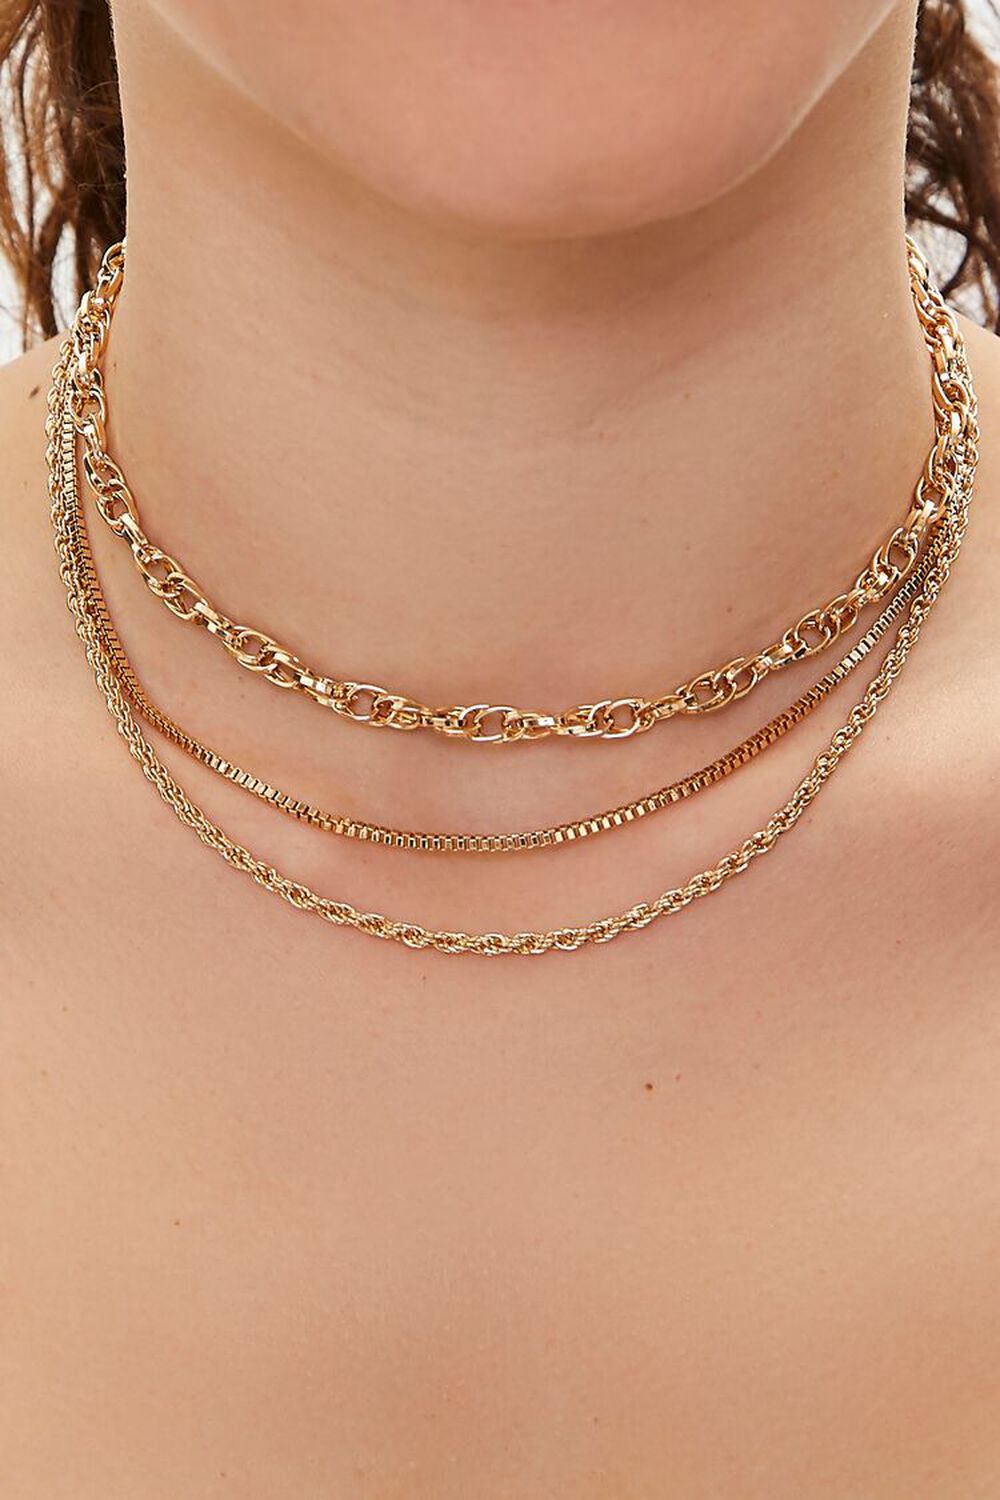 GOLD Assorted Chain Necklace Set, image 1